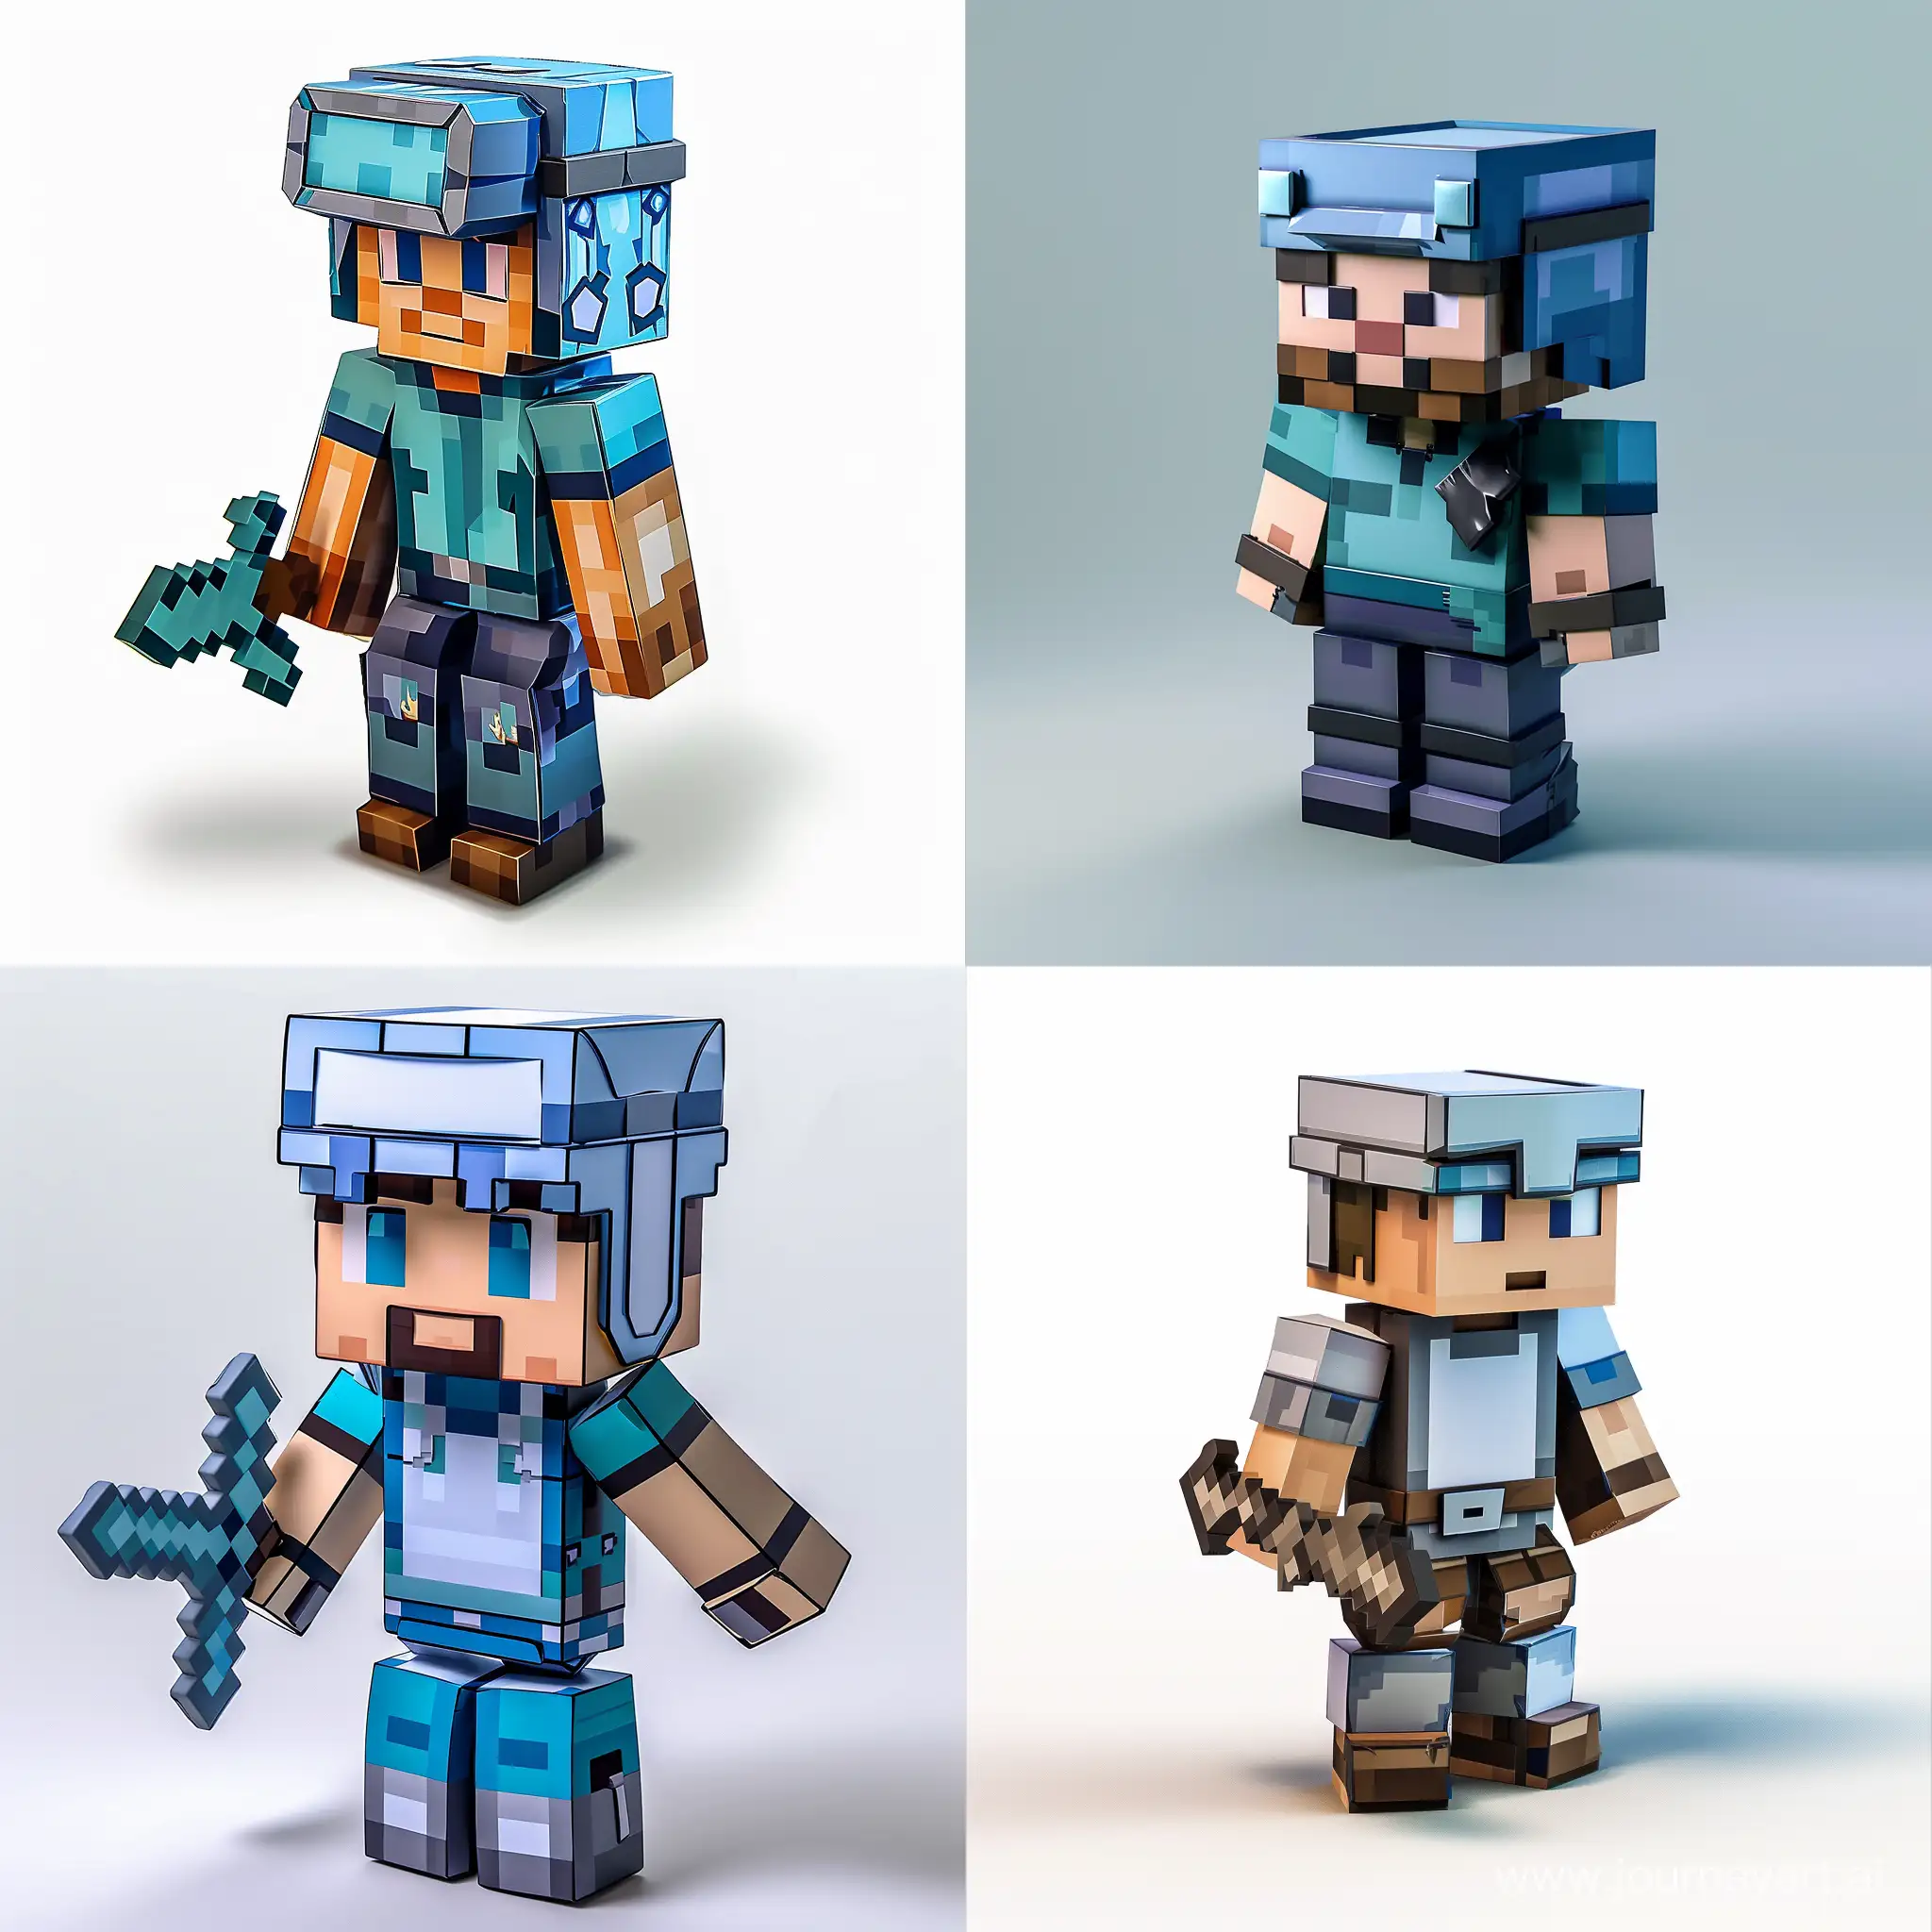 HD art, minecraft thematic, 3d model of minecraft player with skin which includes helmet.